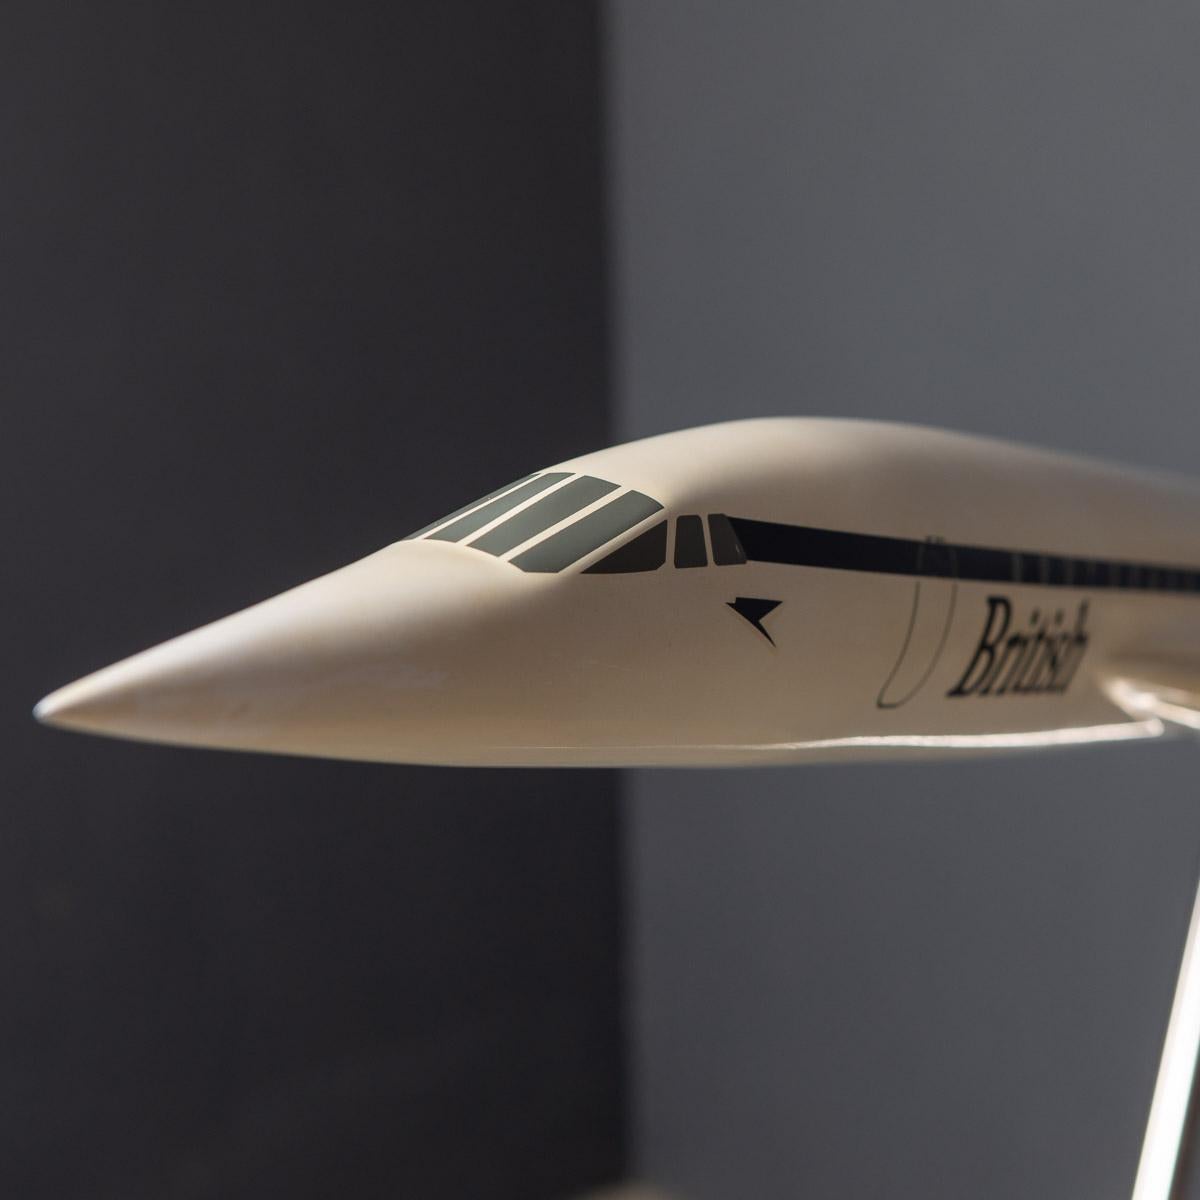 English Concorde Model Made by Space Models, England, c.1990